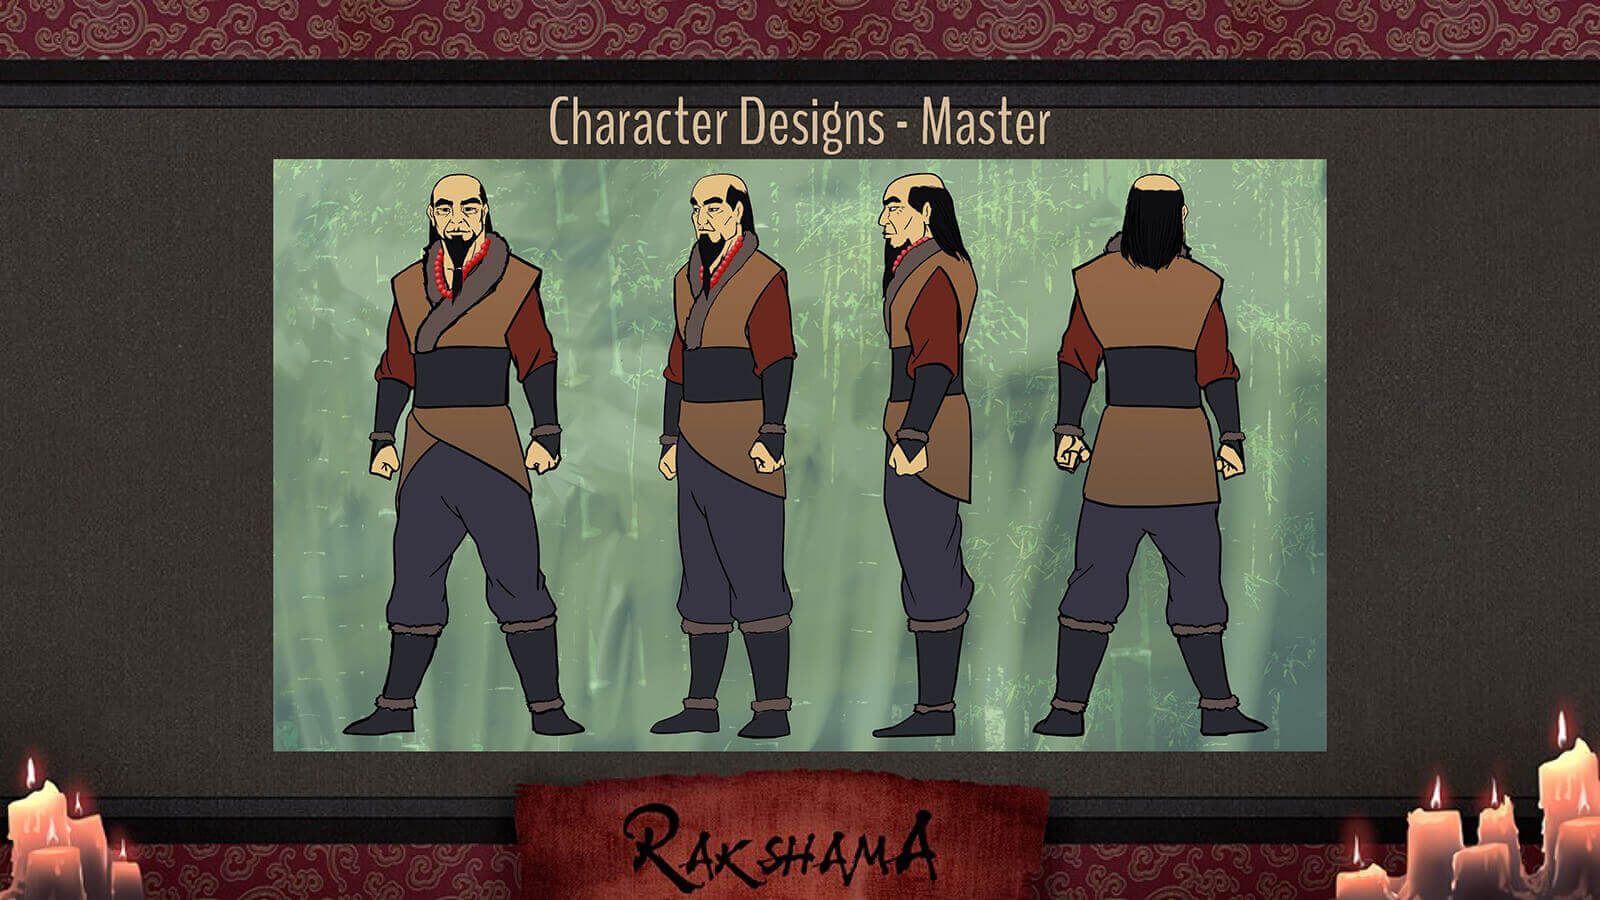 Character Design slide for the film Rakshama, depicting the Master character, a warrior in a brown, blue, and red clothing